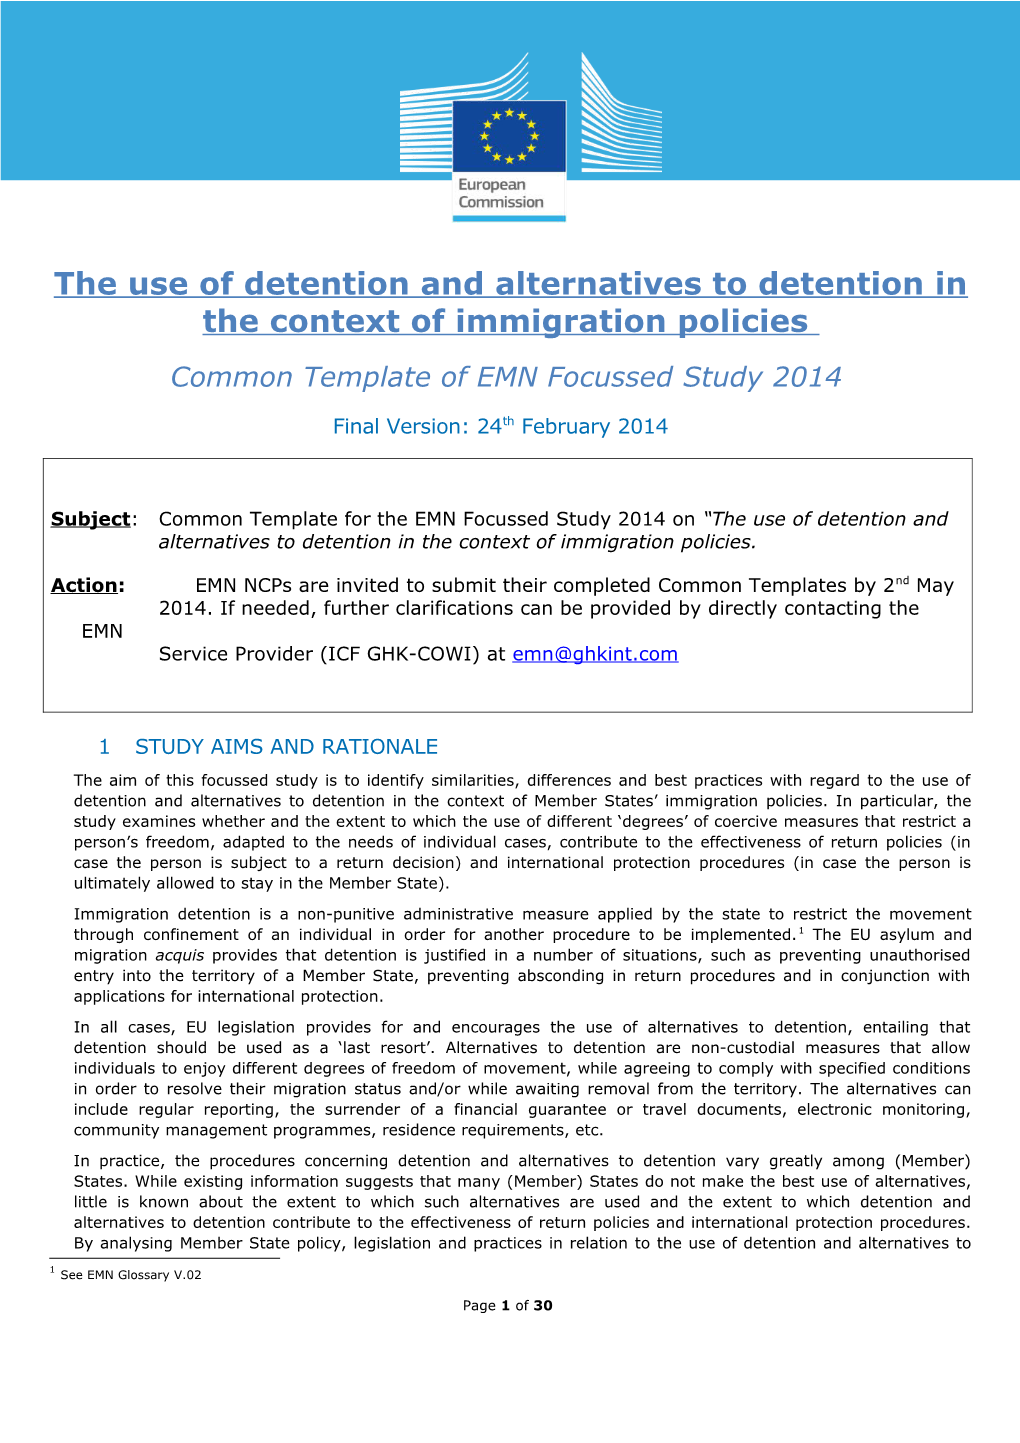 The Use of Detention and Alternatives to Detention in the Context of Immigration Policies